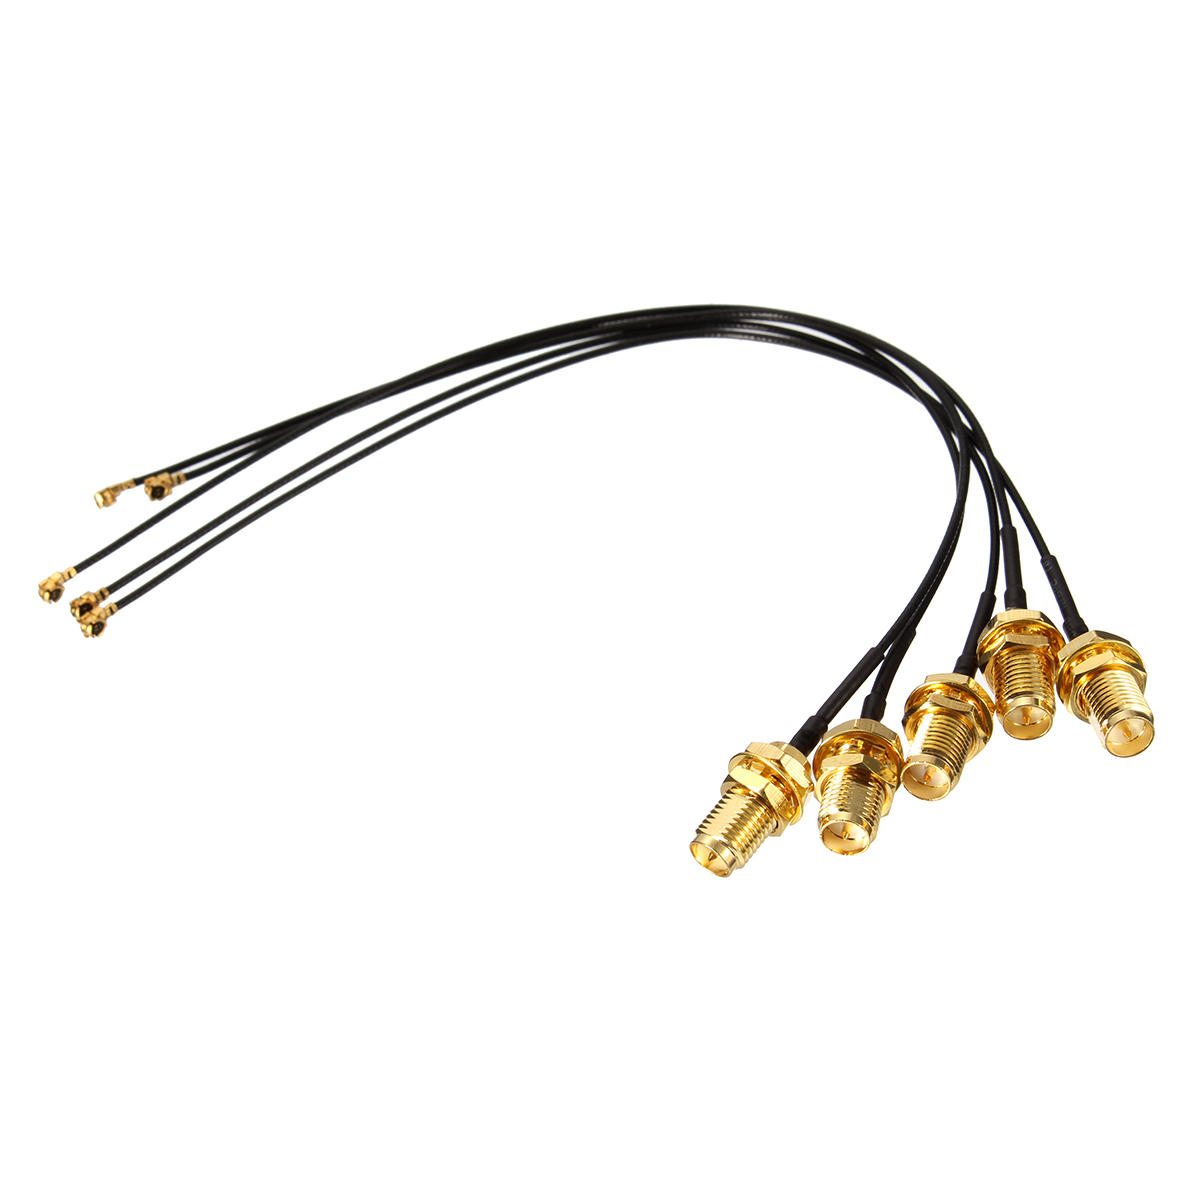 

Mini RP-SMA to IPX Pigtail Antenna WiFi Cable Jack Male SMA to IPX Extension Cord Connector Line